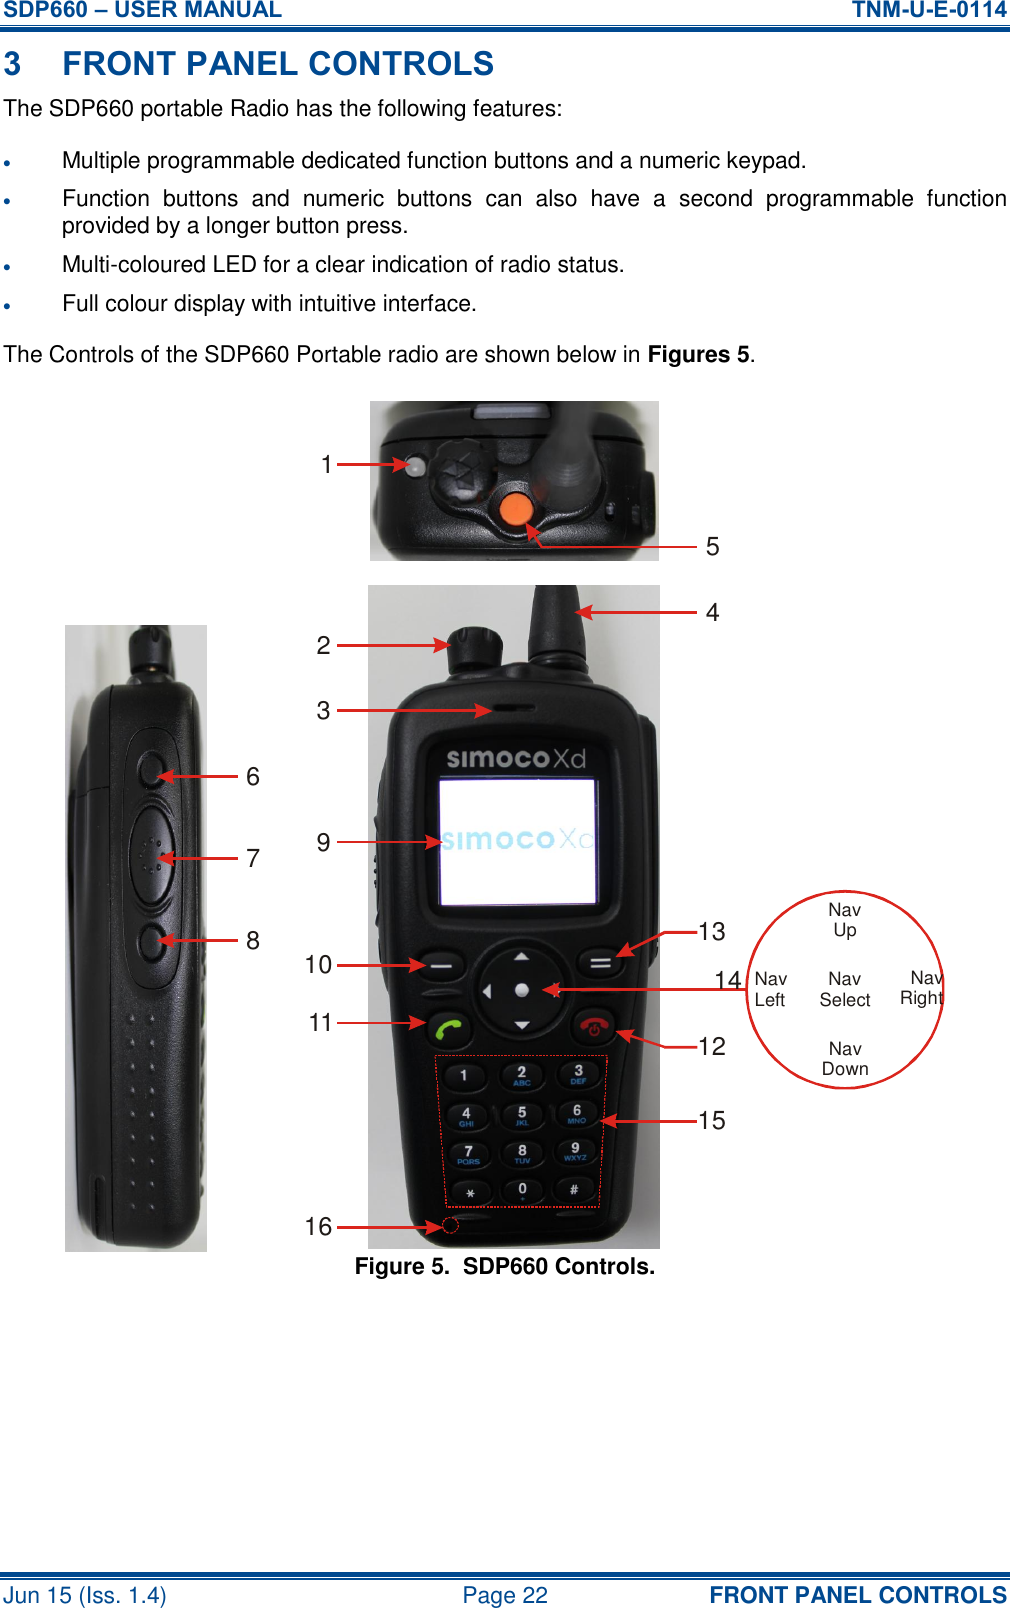 SDP660 – USER MANUAL  TNM-U-E-0114 Jun 15 (Iss. 1.4)  Page 22 FRONT PANEL CONTROLS 3 FRONT PANEL CONTROLS The SDP660 portable Radio has the following features:  Multiple programmable dedicated function buttons and a numeric keypad.  Function  buttons  and  numeric  buttons  can  also  have  a  second  programmable  function provided by a longer button press.  Multi-coloured LED for a clear indication of radio status.  Full colour display with intuitive interface. The Controls of the SDP660 Portable radio are shown below in Figures 5. Figure 5.  SDP660 Controls.  NavSelectNavLeft NavRightNavUpNavDown1234567891011 1213141516